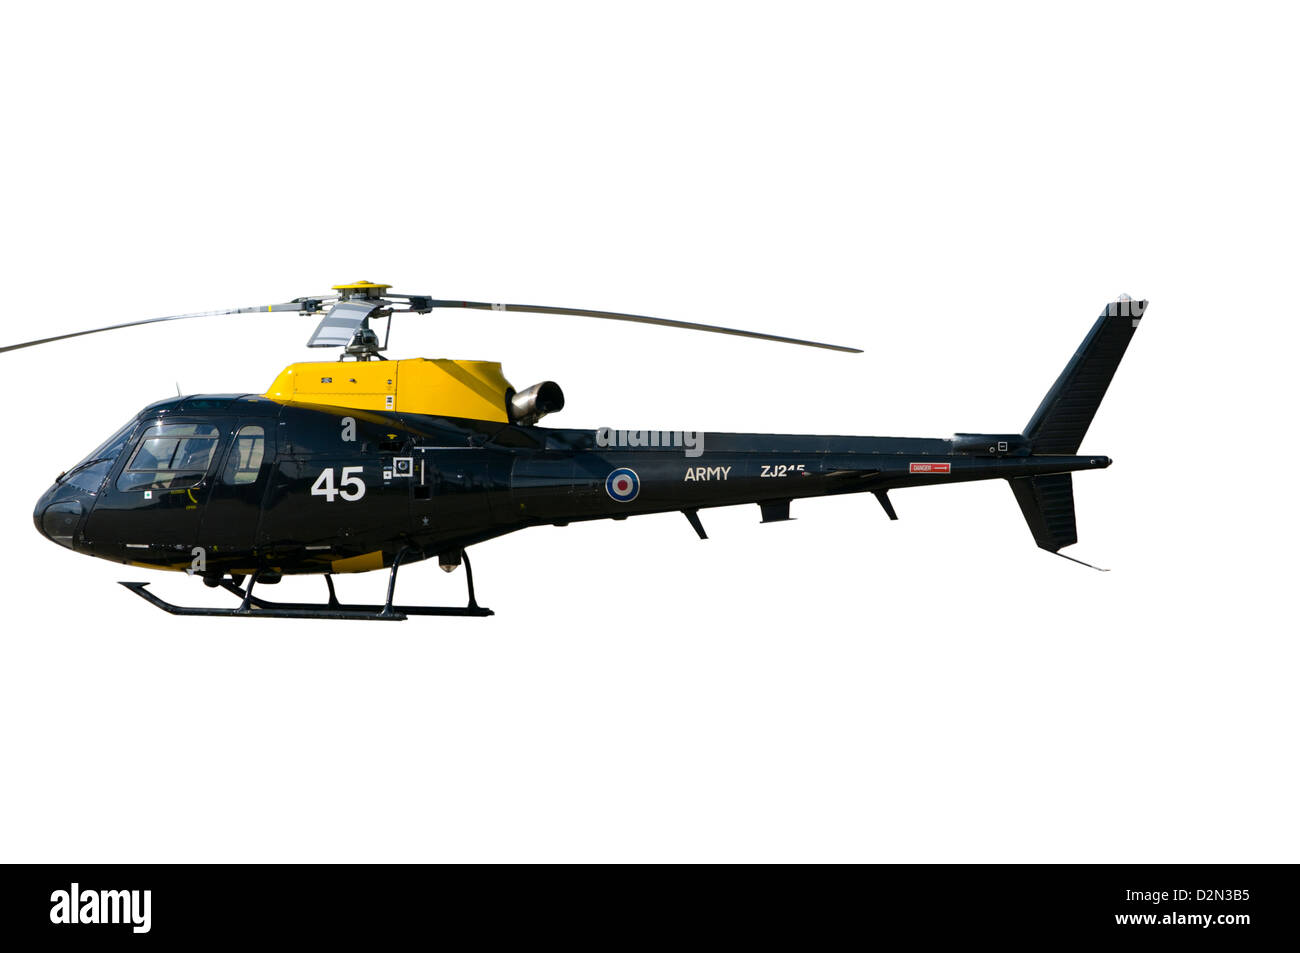 An Army Air Corps Squirrel Helicopter Stock Photo